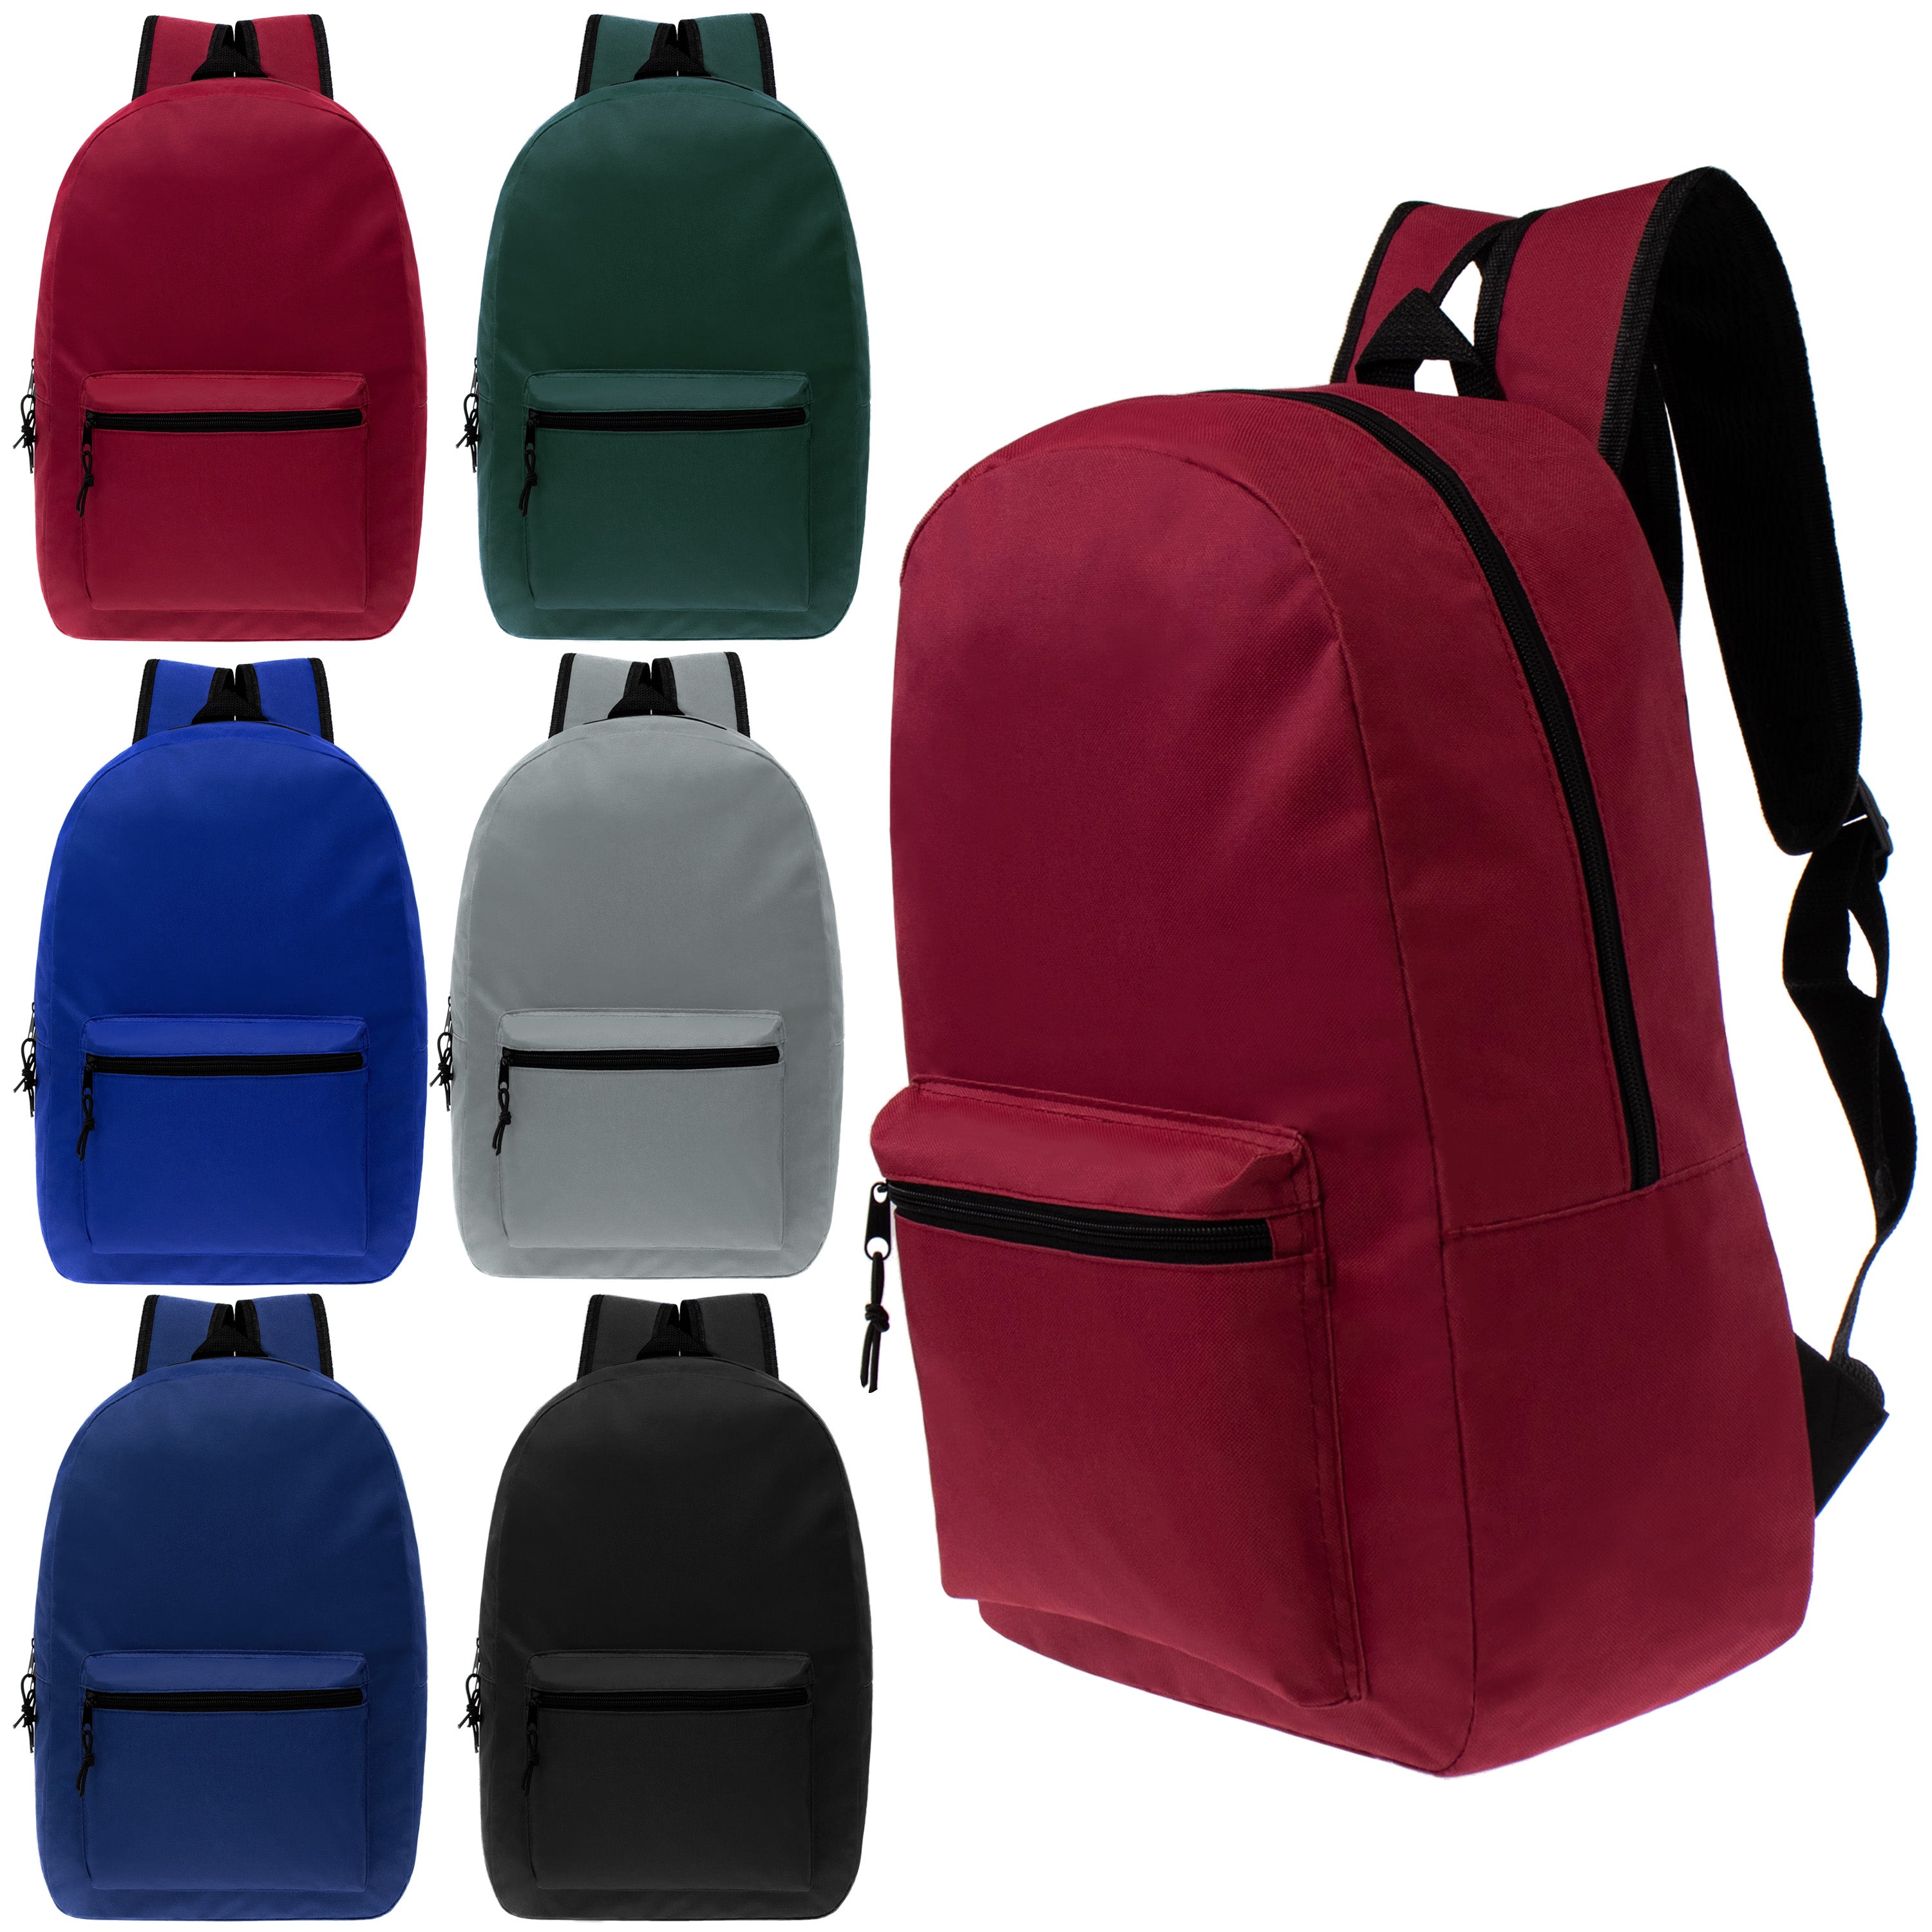 15 inches School Backpacks for Kids In Assorted Colors Wholesale School Supplies Kit Case Of 12